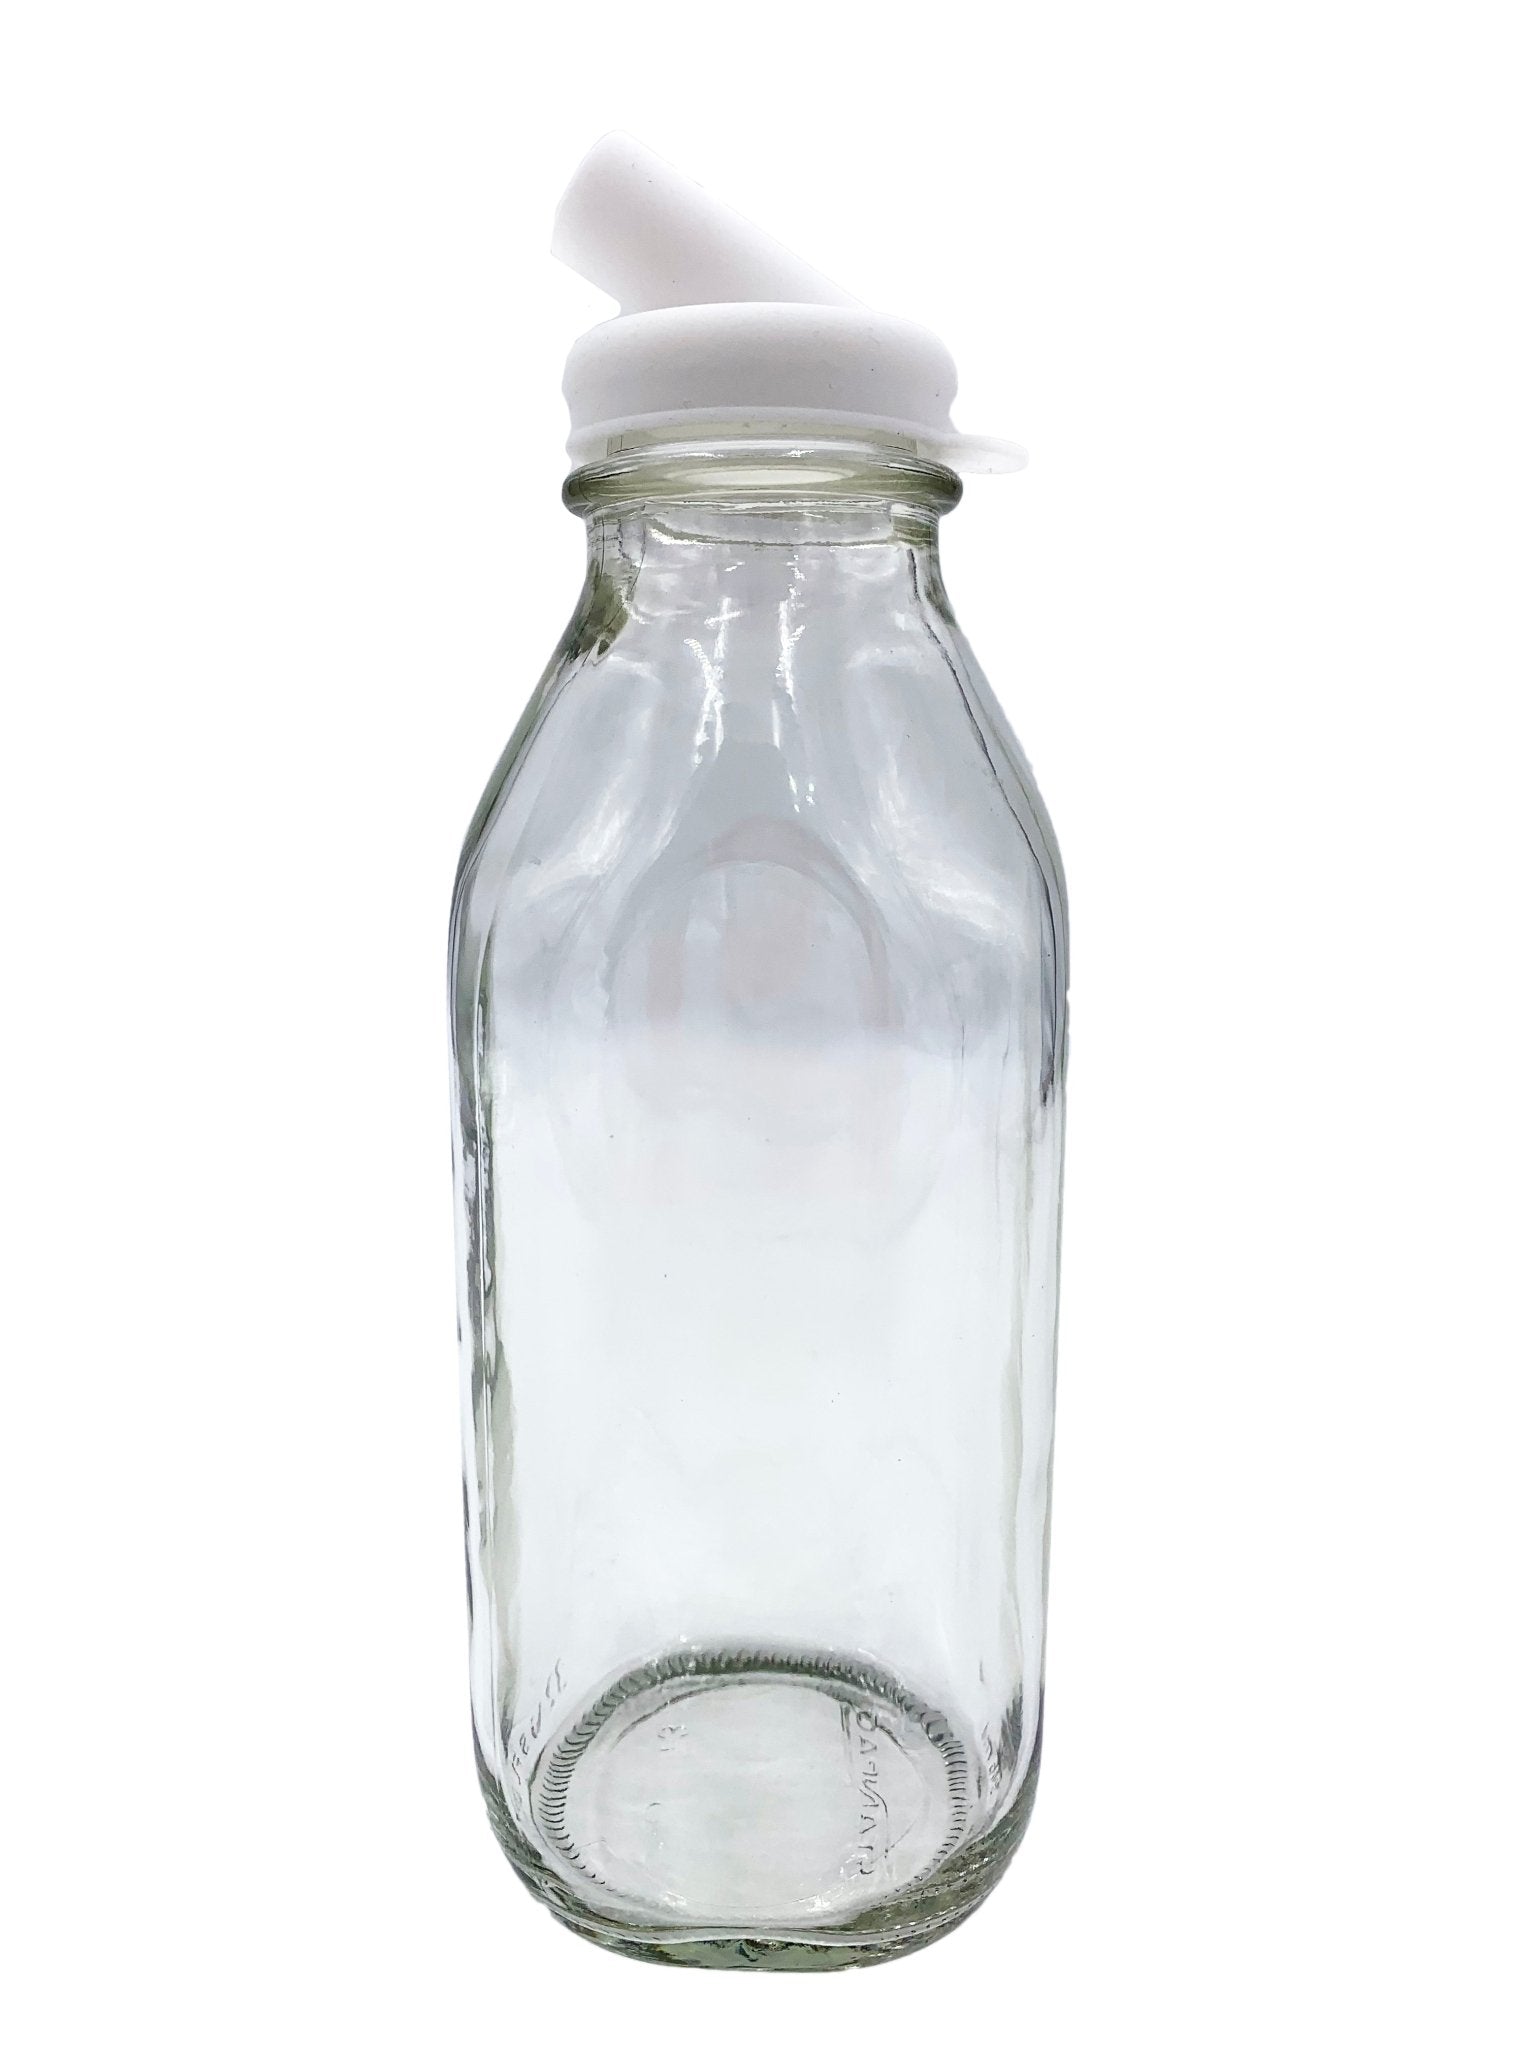 The Dairy Shoppe 2 qt Glass Milk Bottle 64 oz Heavy Glass with Lid Creamery Style, Clear Glass